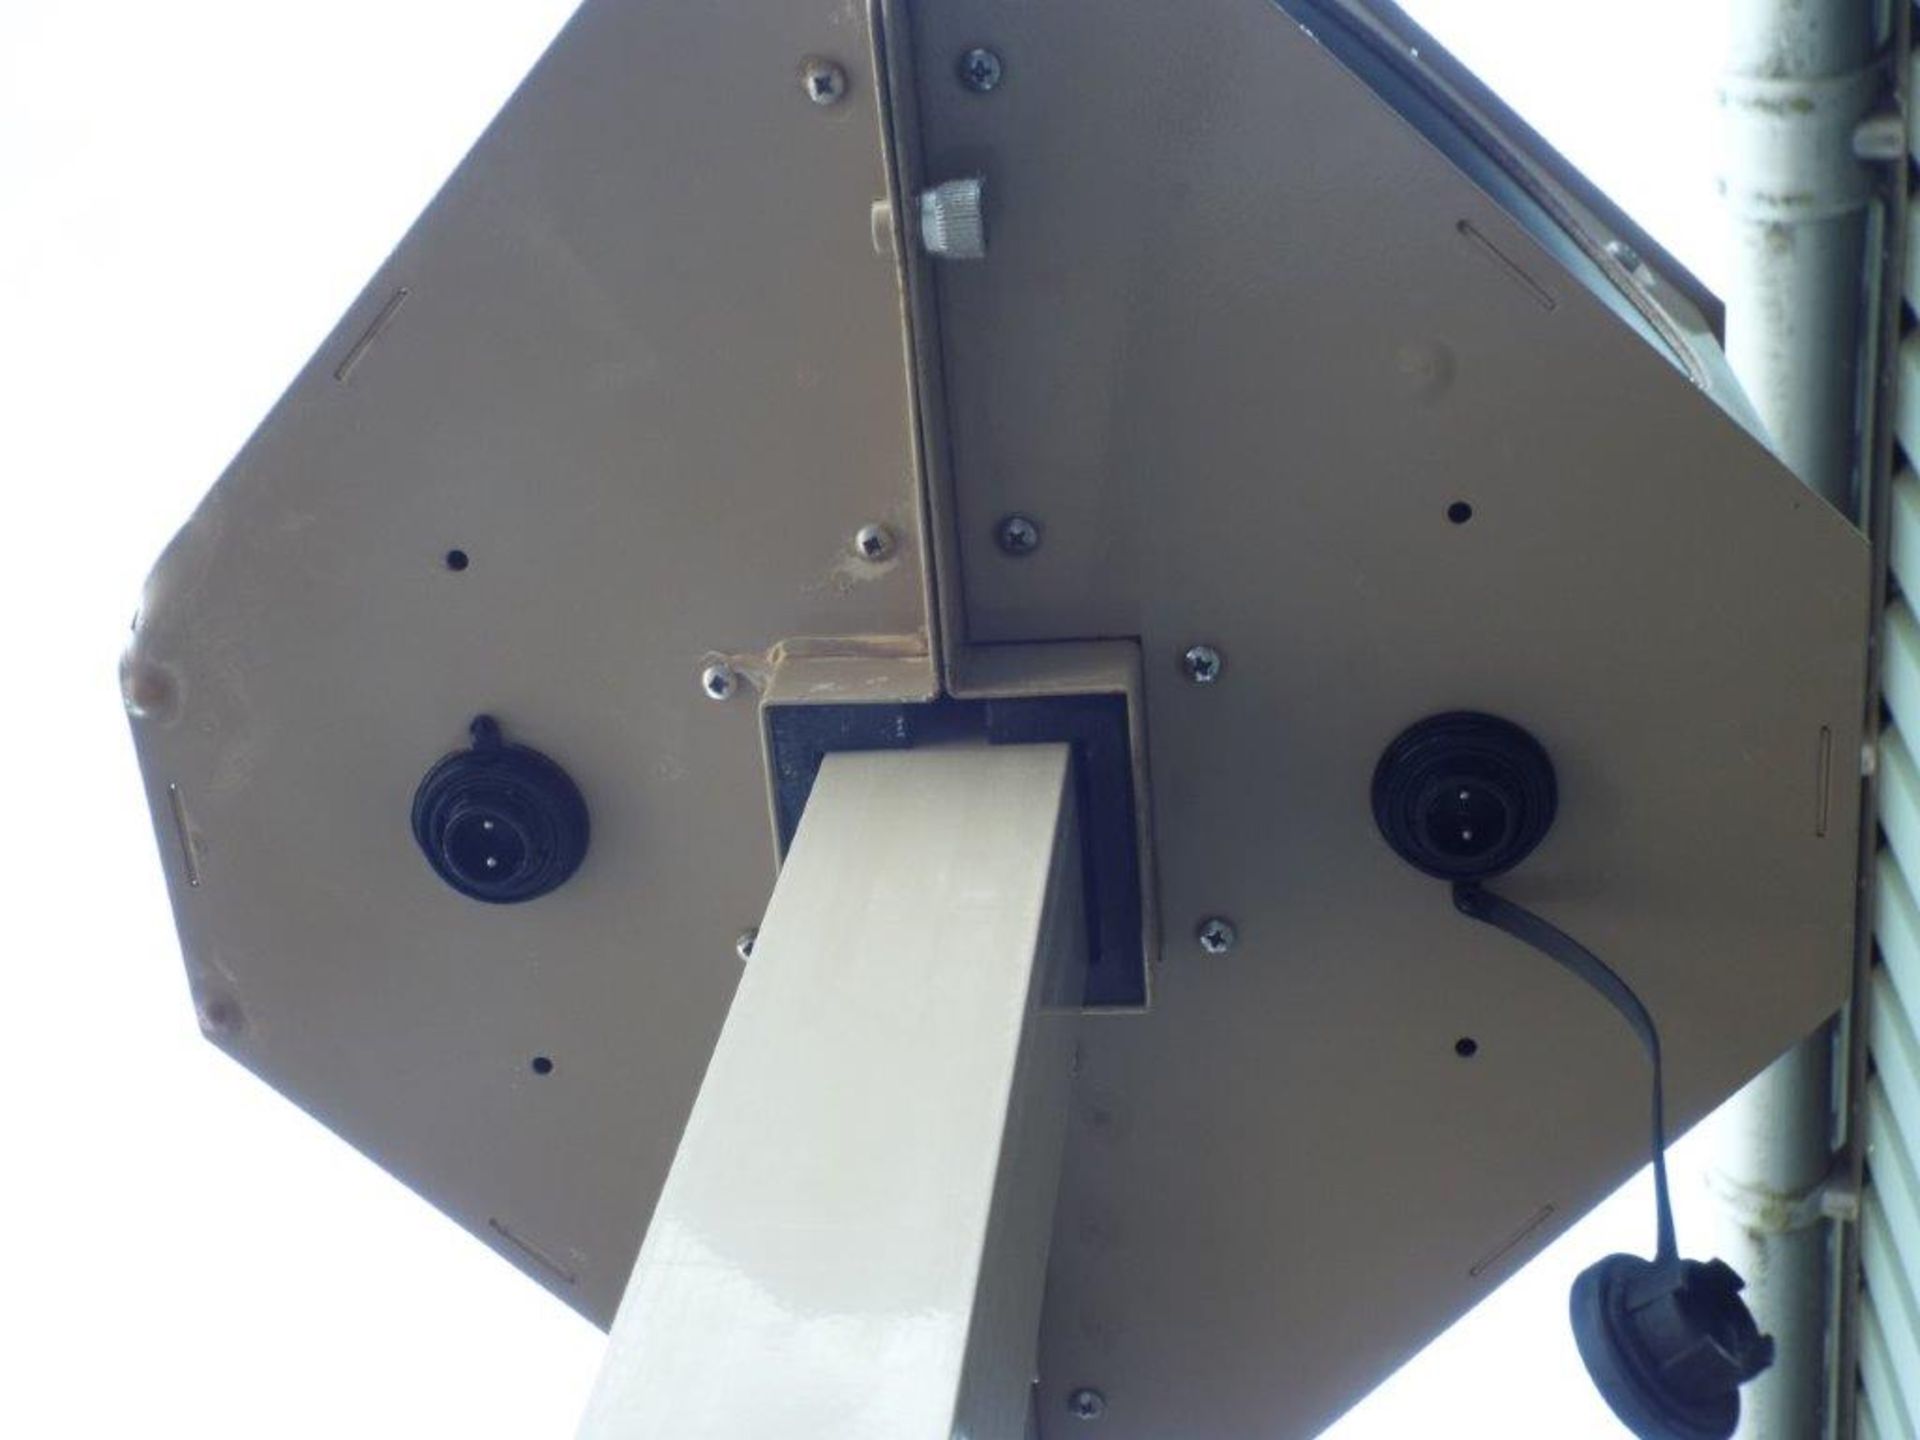 Madahcom Tacwaves Field Station Tower Collapsable Speaker Array - Image 4 of 14